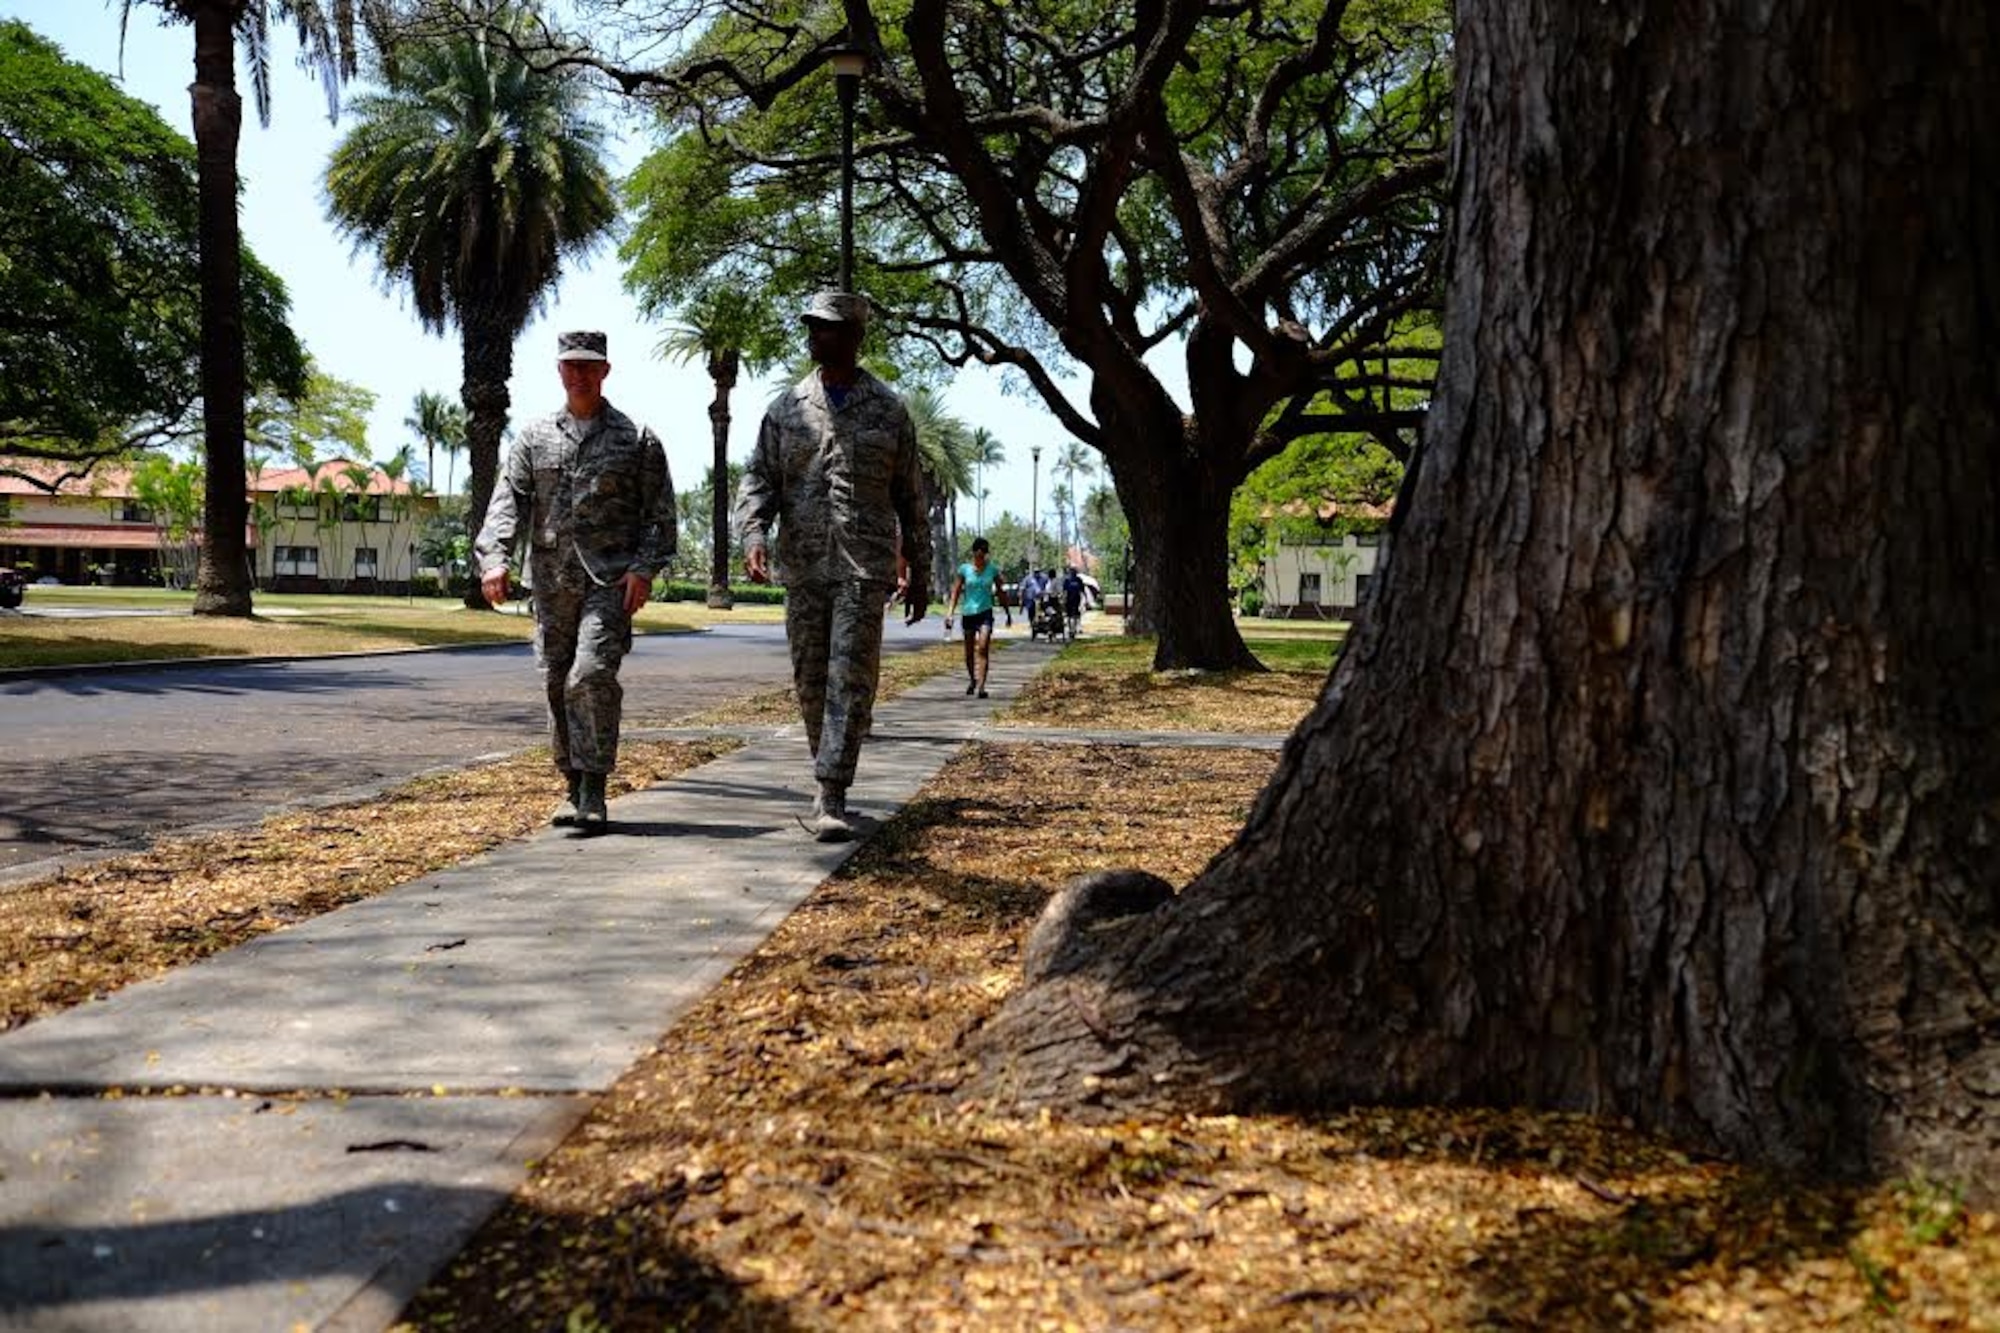 Col. Randall Huiss, 15th Wing commander, and Chief Master Sgt. Jerry Williams Jr., 15th Wing command chief, walk down Signer Ave. during the fourth-annual ‘One Mile Walk to Safety’  here, on April 1, 2016. The Walk to Safety is planned in conjunction with NOAA, state civil defense, City and County of Honolulu departments of emergency management and the American Red Cross and serves to raise awareness for the potential tsunami threat Hawaii faces. (U.S. Air Force photo by Staff Sgt. Christopher Stoltz/Released)